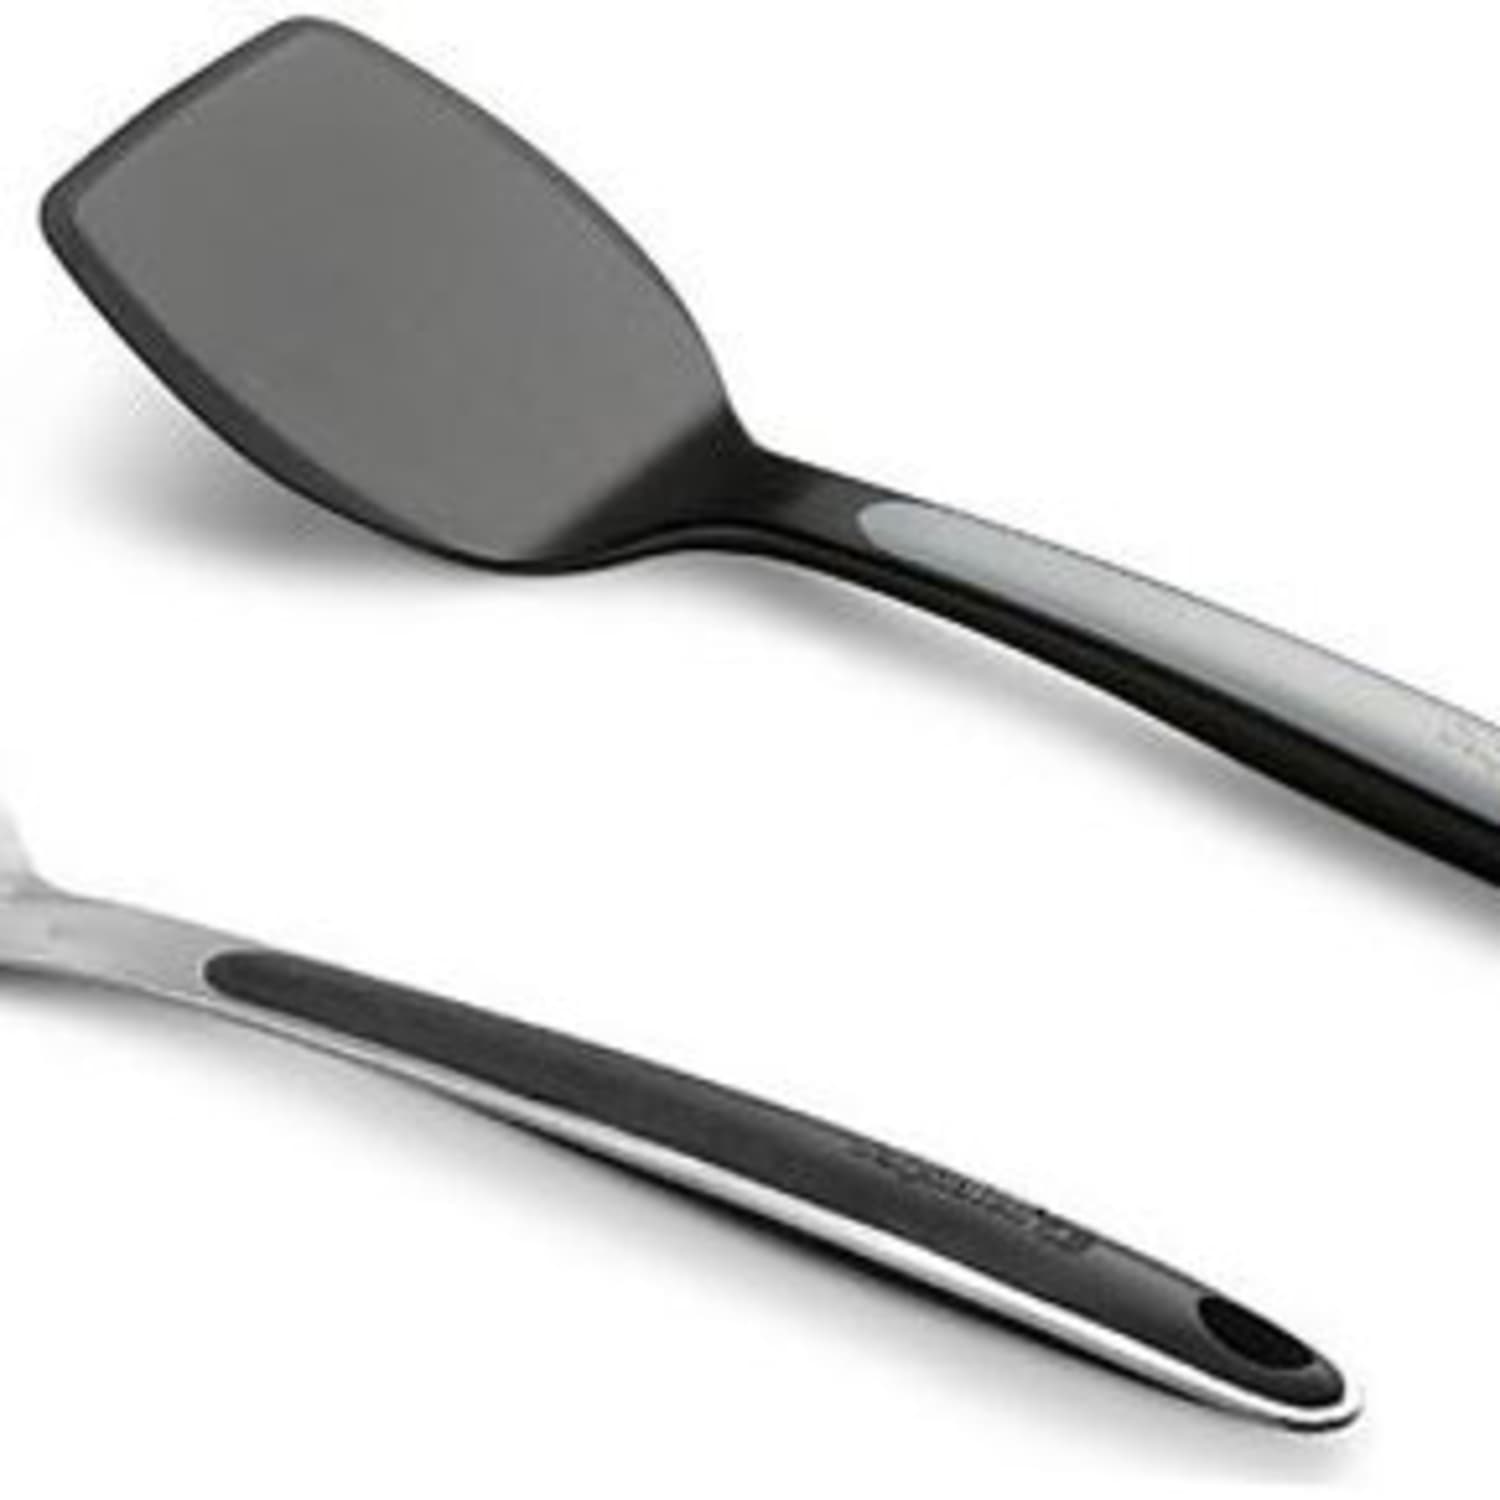 what is a plastic spatula used for